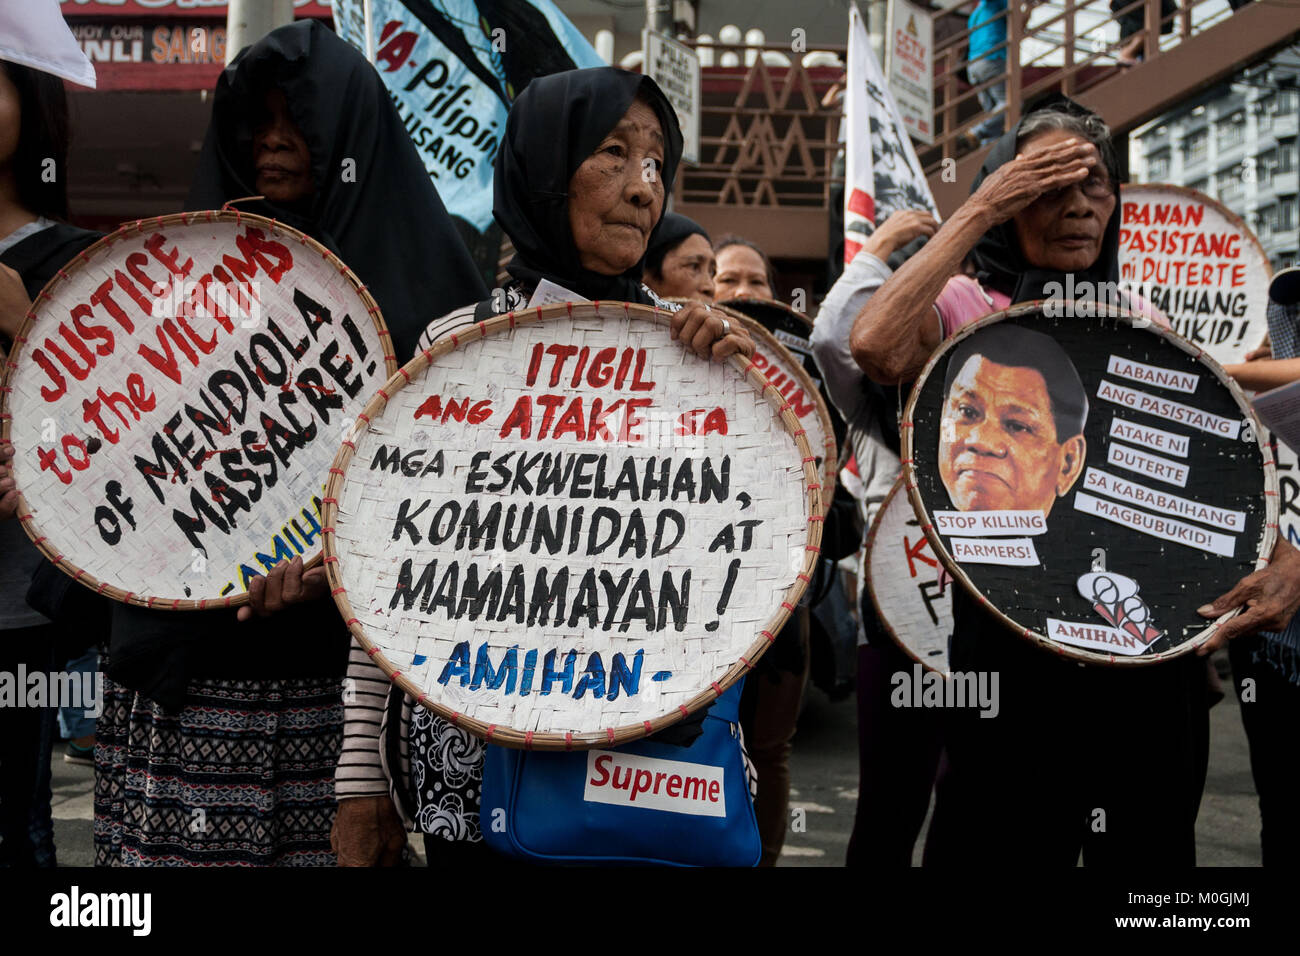 Philippines. 22nd Jan, 2018. Peasant farmers marched to Mendiola Bridge in Manila to commemorate the 31st anniversary of the protest rally in which 13 protesters were killed by state police. The Kilusang Magbubukid ng Pilipinas (KMP), called for genuine land reform and the distribution of lands to the peasant farmers. They are also against ChaCha (Charter Change) by President Duterte as this could result in 100% ownership of lands by foreigners. Credit: J Gerard Seguia/ZUMA Wire/Alamy Live News Stock Photo